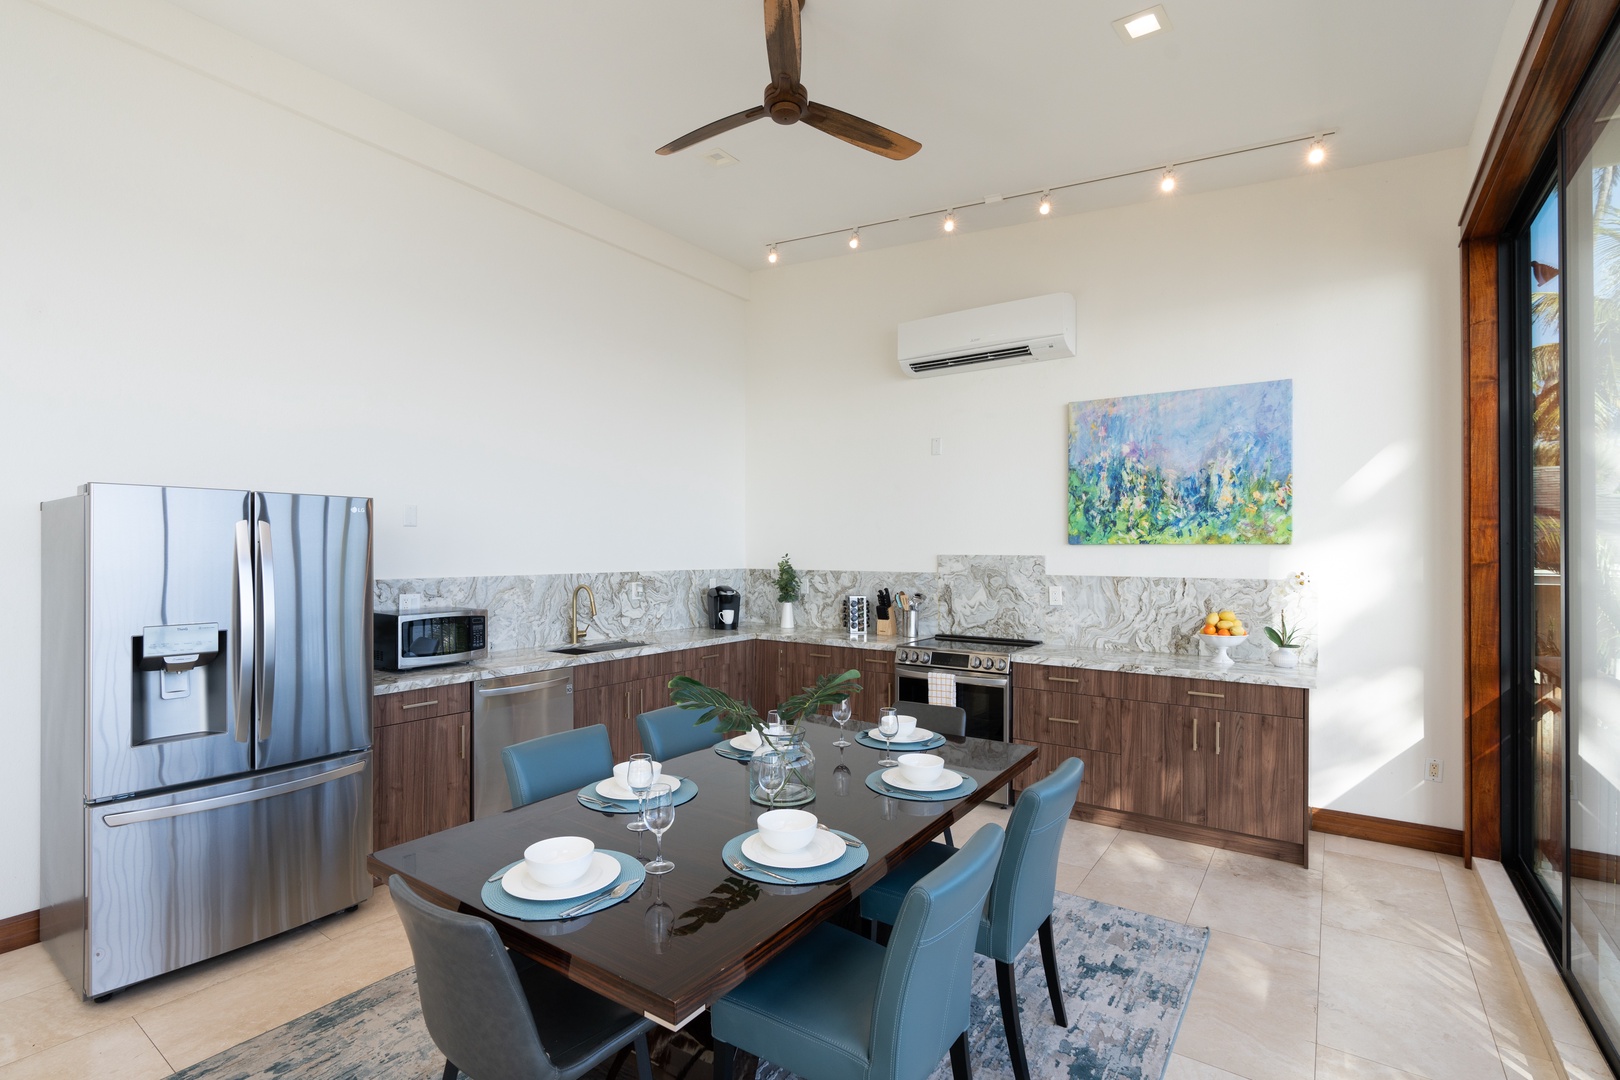 Honolulu Vacation Rentals, Wailupe Seaside - Open concept throughout with expansive dining and kitchen area.